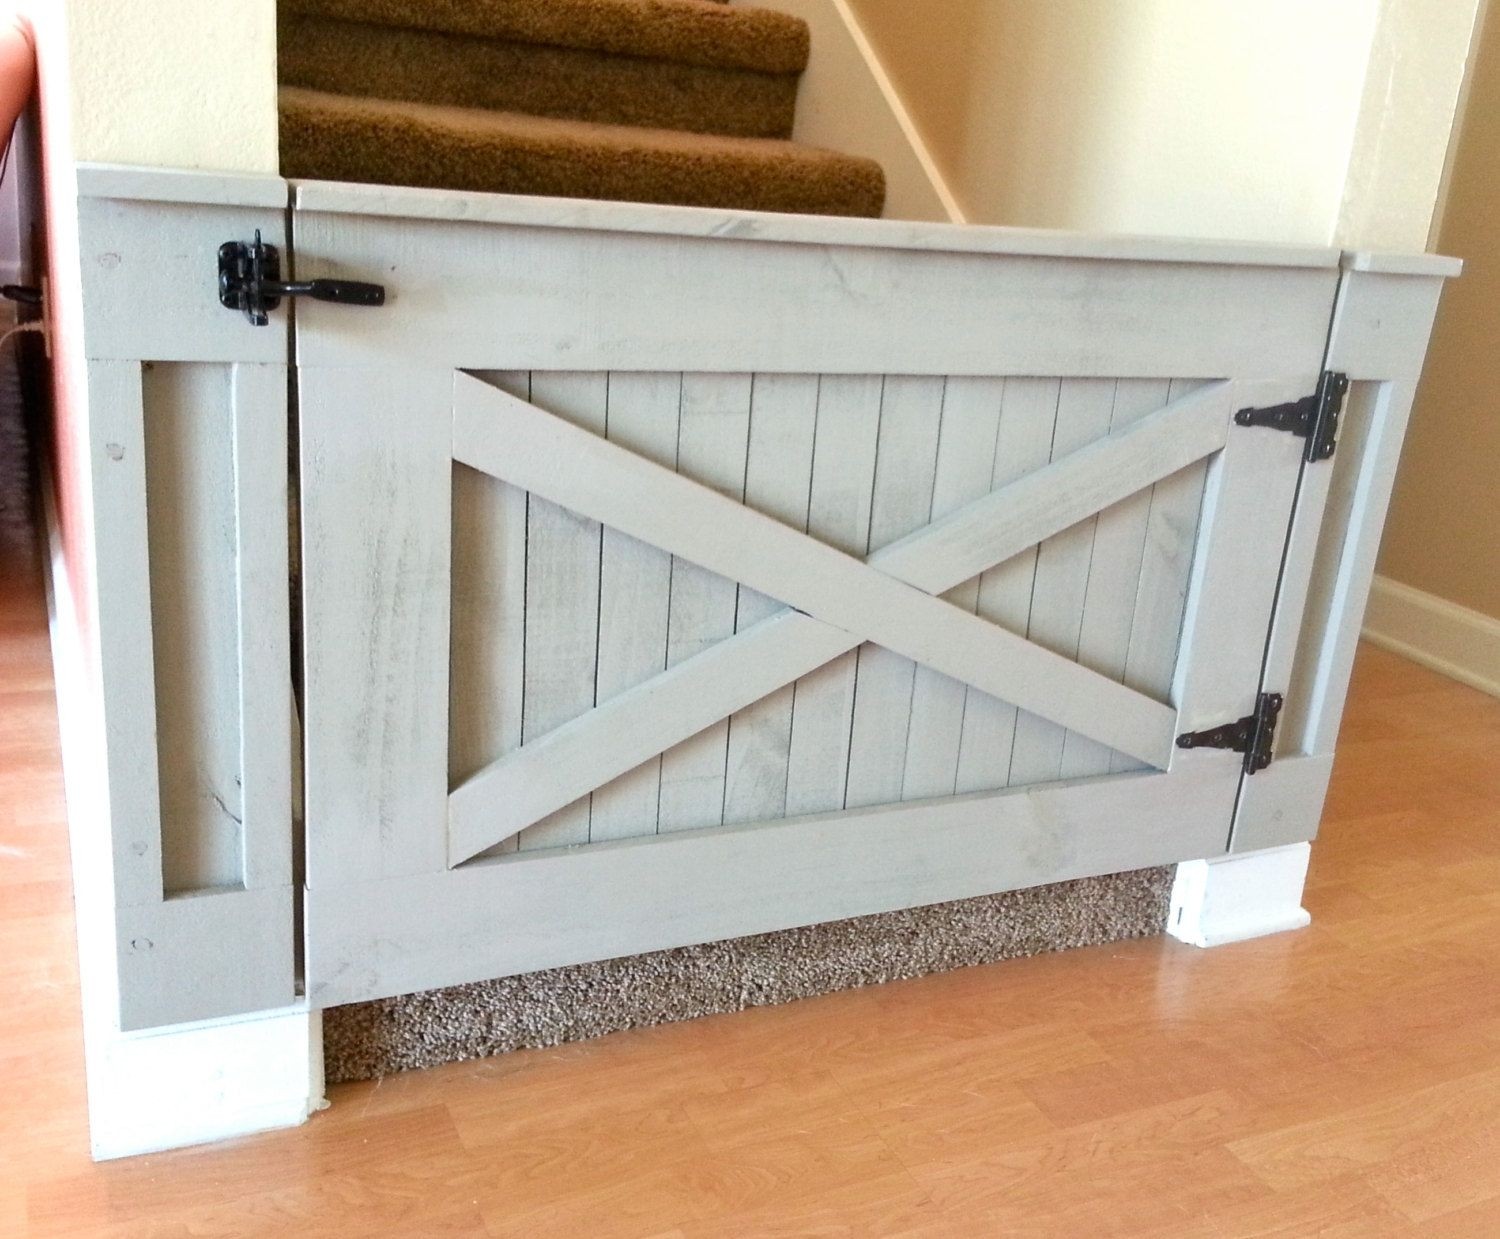 Up to 41 Wide Magic Dog Gate for Stairs Adjustable Extra Wide Pet Gate for The House Doorways and Stairways. 